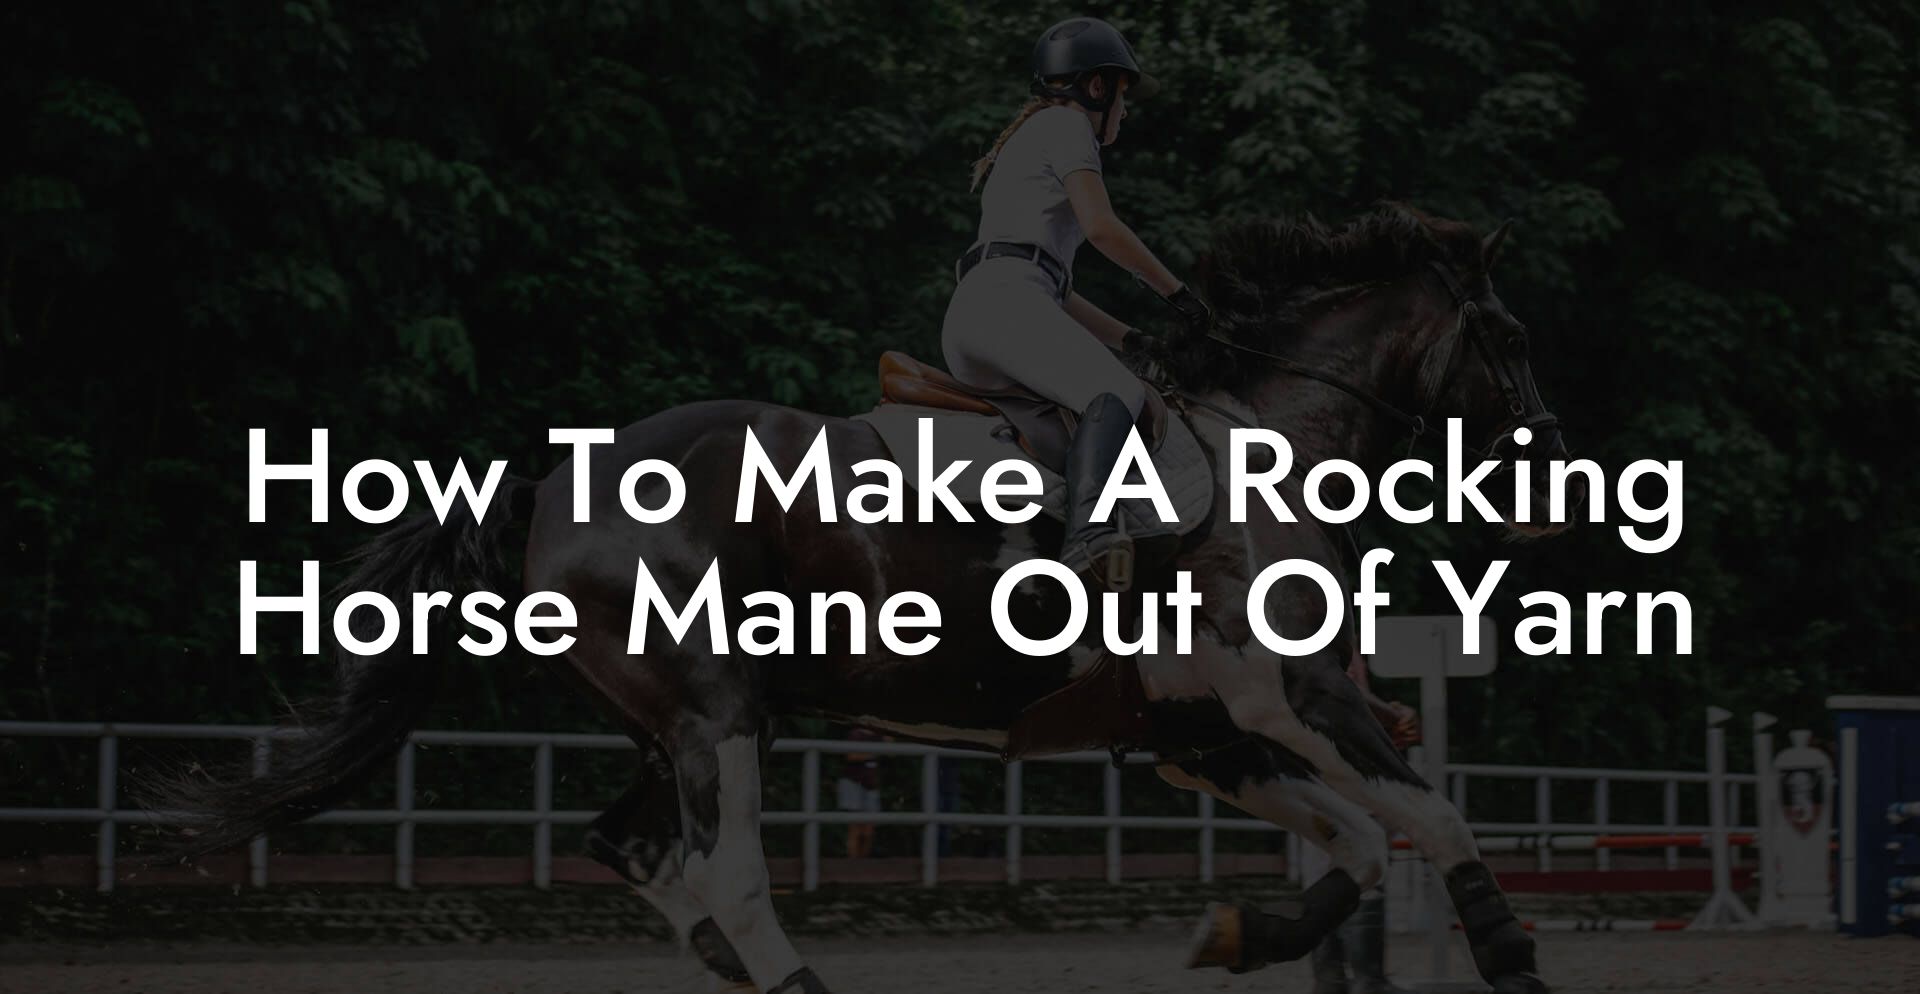 How To Make A Rocking Horse Mane Out Of Yarn